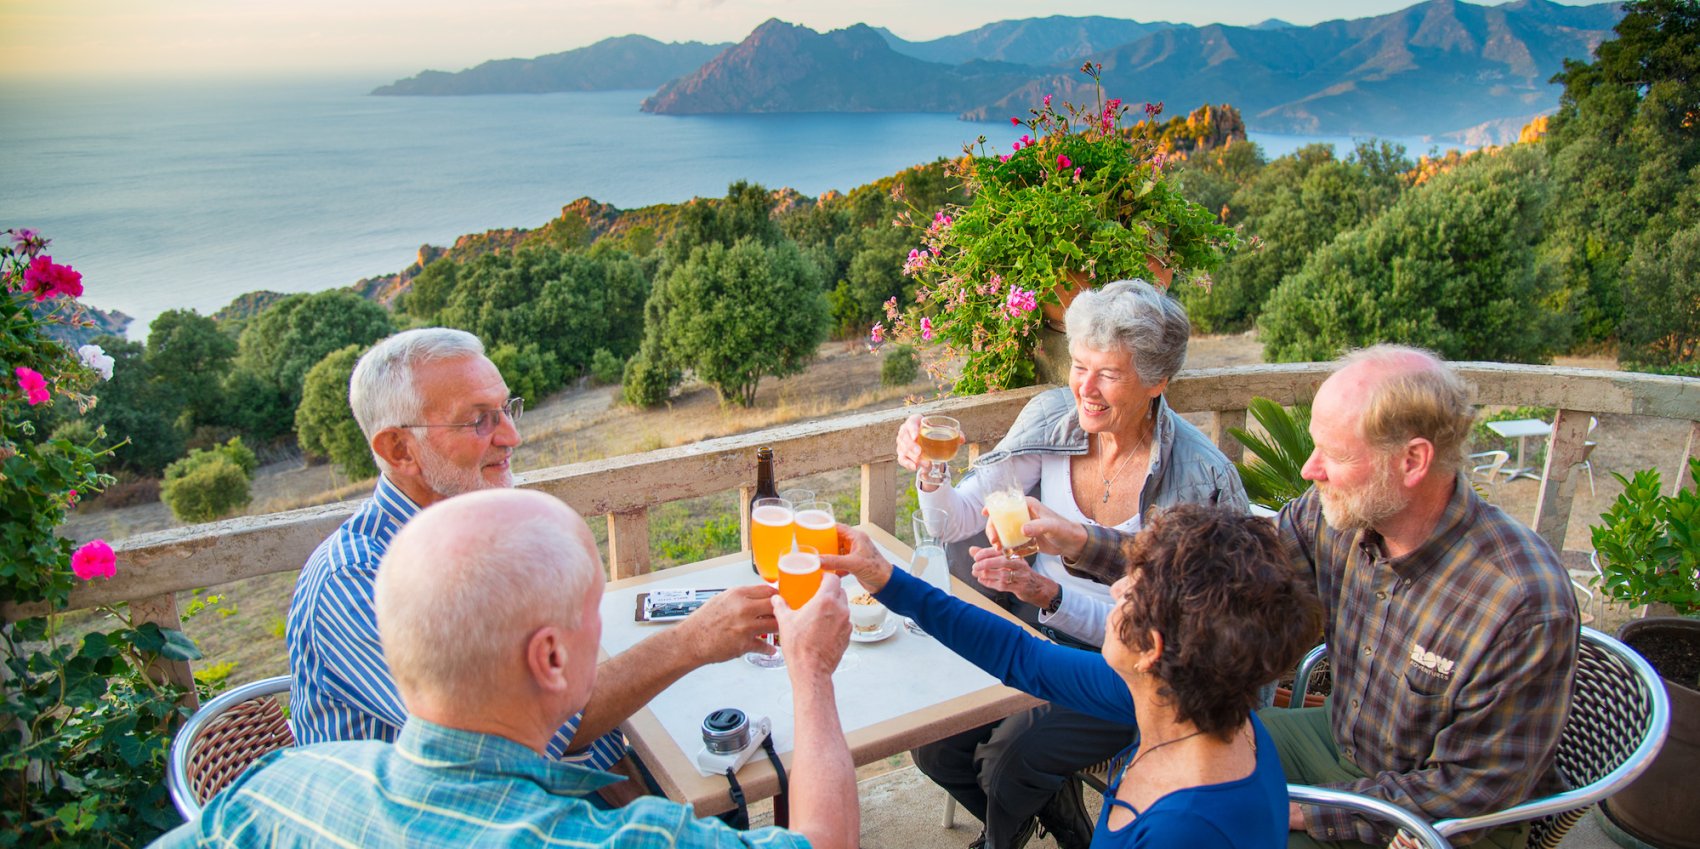 People sitting around a table raising a glass while smiling at sunset at a rooftop restaurant in Corsica, France.